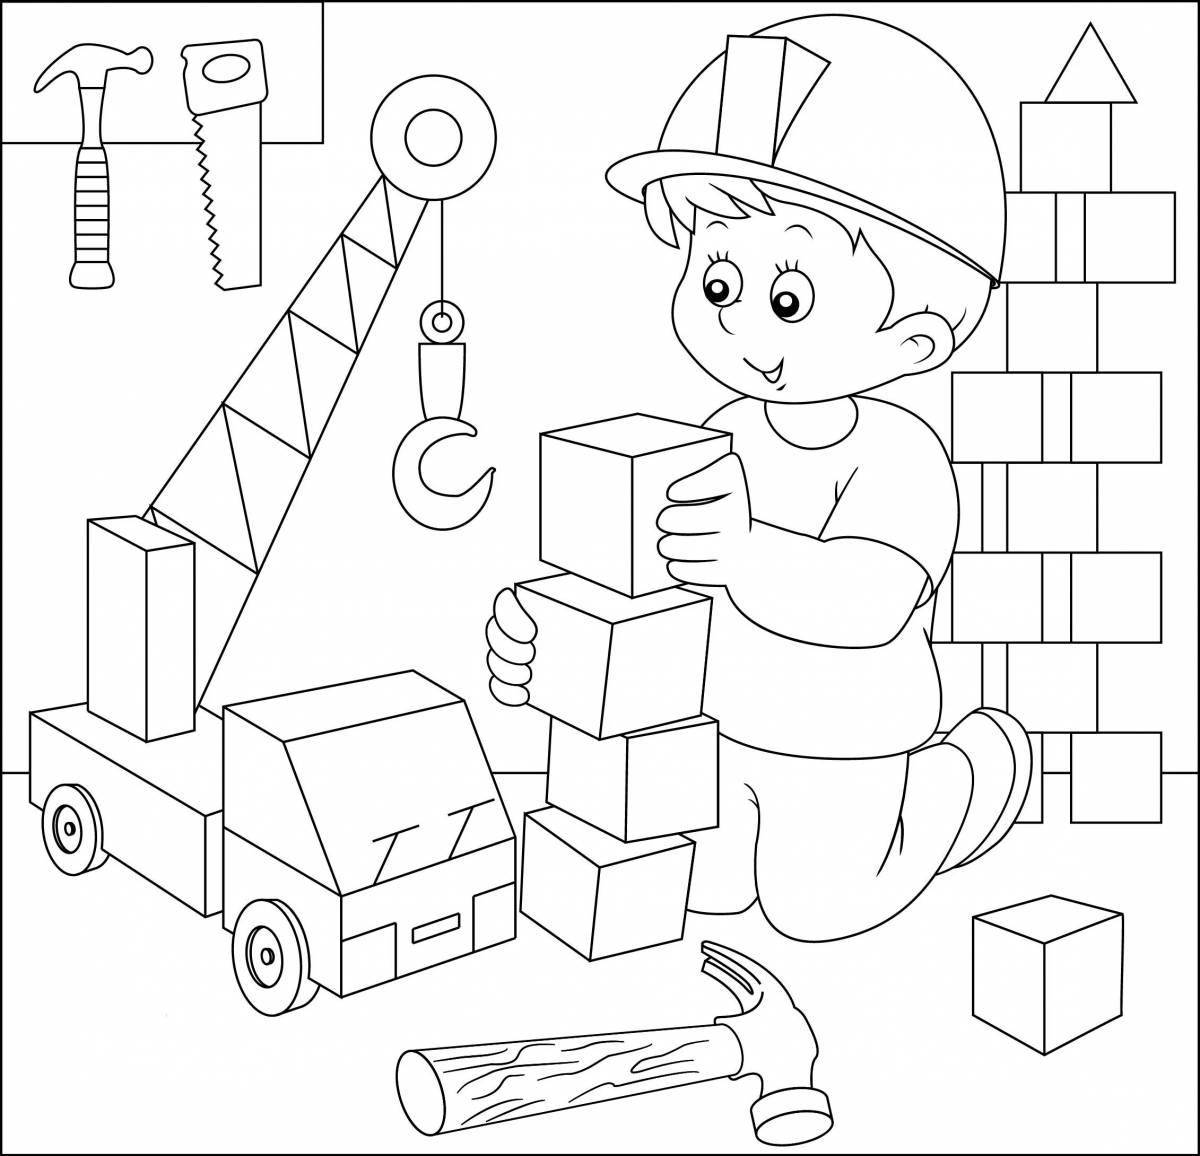 Bright safety coloring book